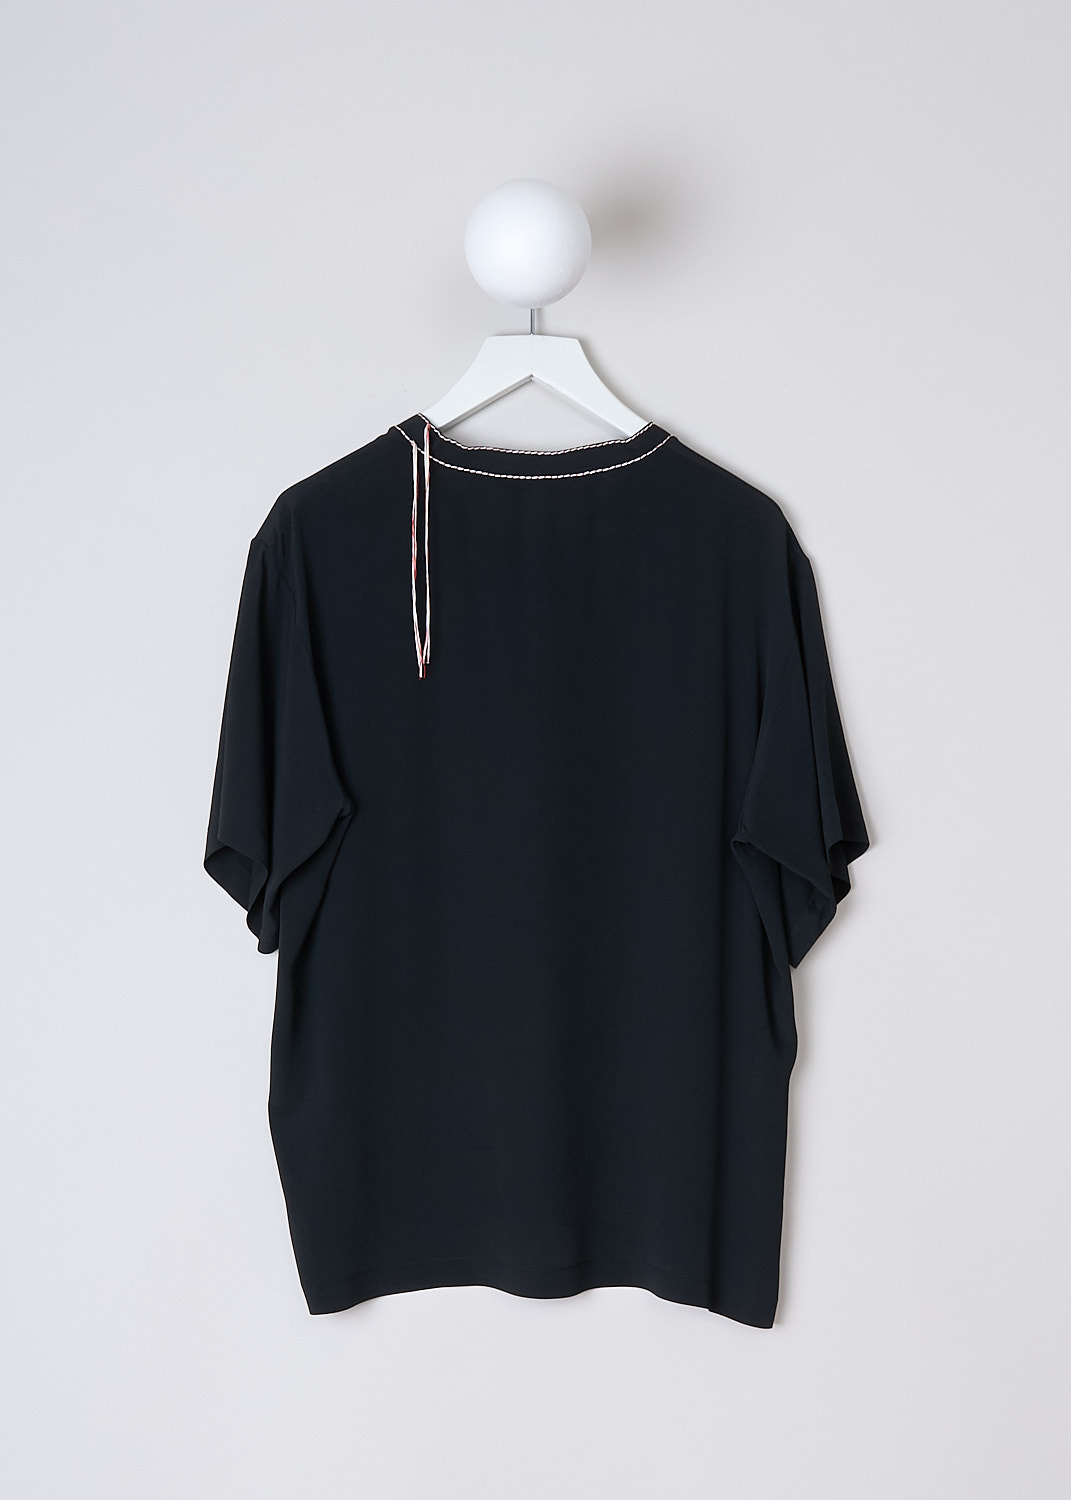 MARNI, BLACK WASHED CRÊPE TOP WITH CONTRAST STITCHING, CAMA0015M1_TA089_00N99, Black, Back, This black washed crêpe top has round neckline with white and red stitching. The top has short sleeves and an asymmetric hemline with small slits. 
